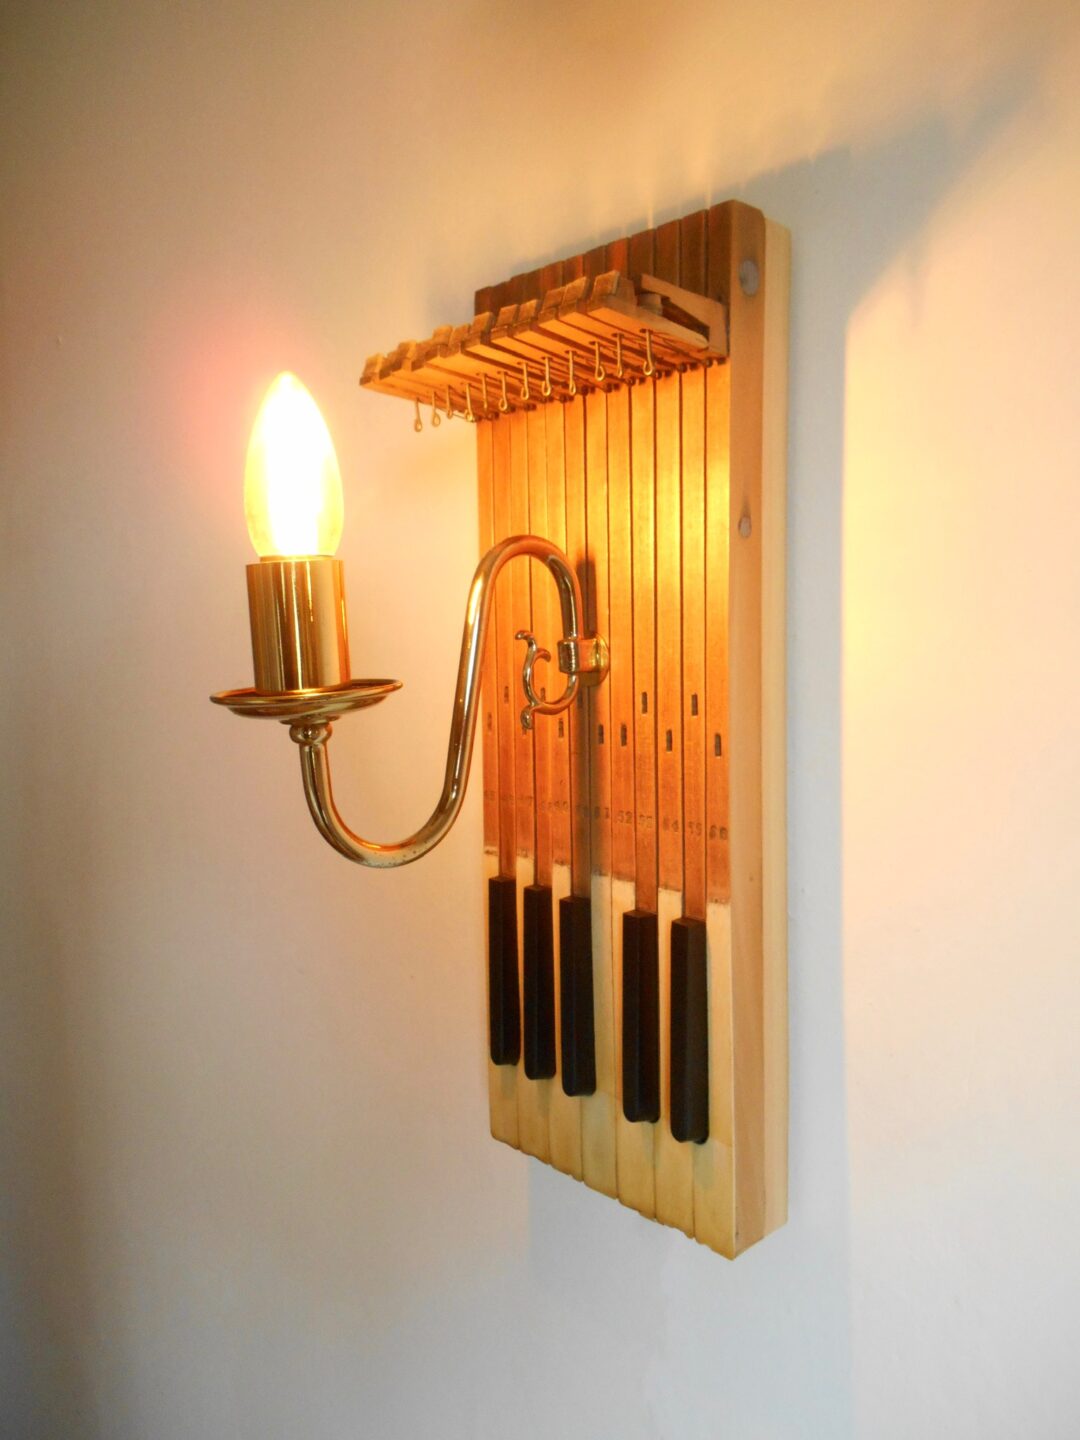 Repurposed wall lamp with antique piano keys by Fiona Bradshaw Designs